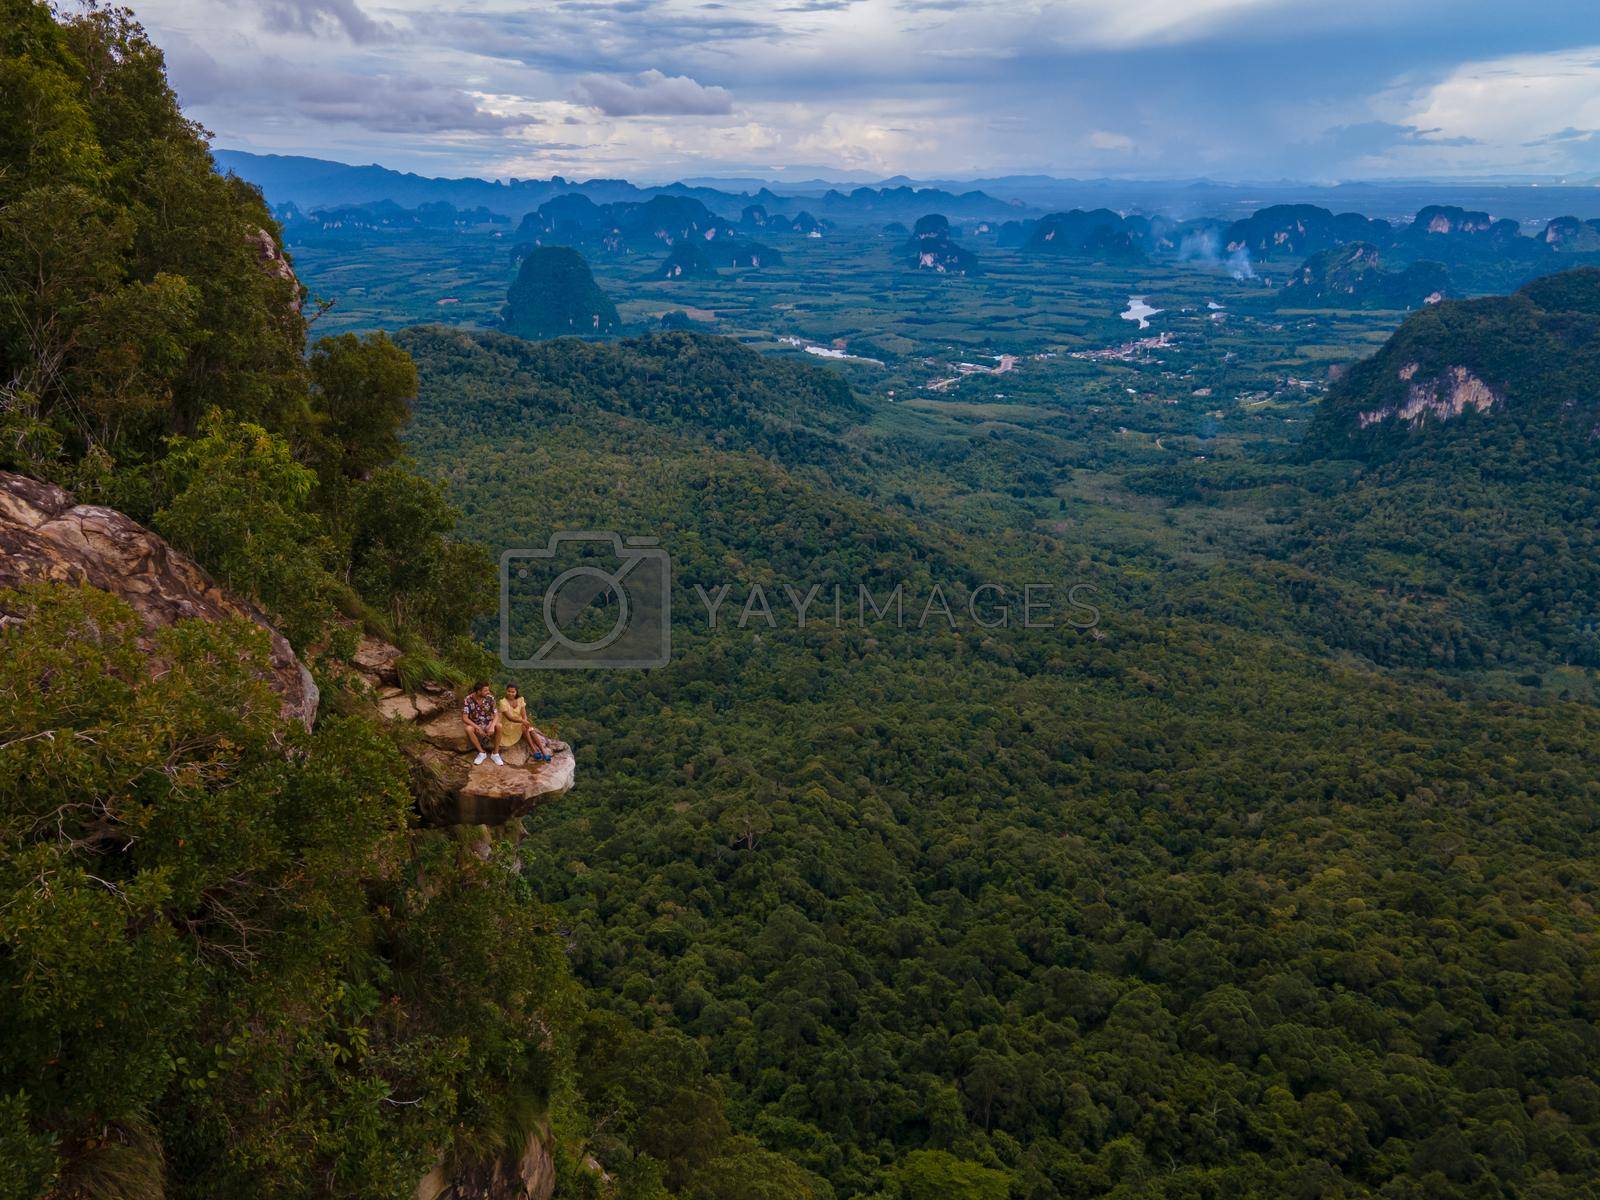 Royalty free image of Dragon Crest mountain Krabi Thailand, a Young traveler sits on a rock that overhangs the abyss, with a beautiful landscape. Dragon Crest or Khuan Sai at Khao Ngon Nak Nature Trail by fokkebok